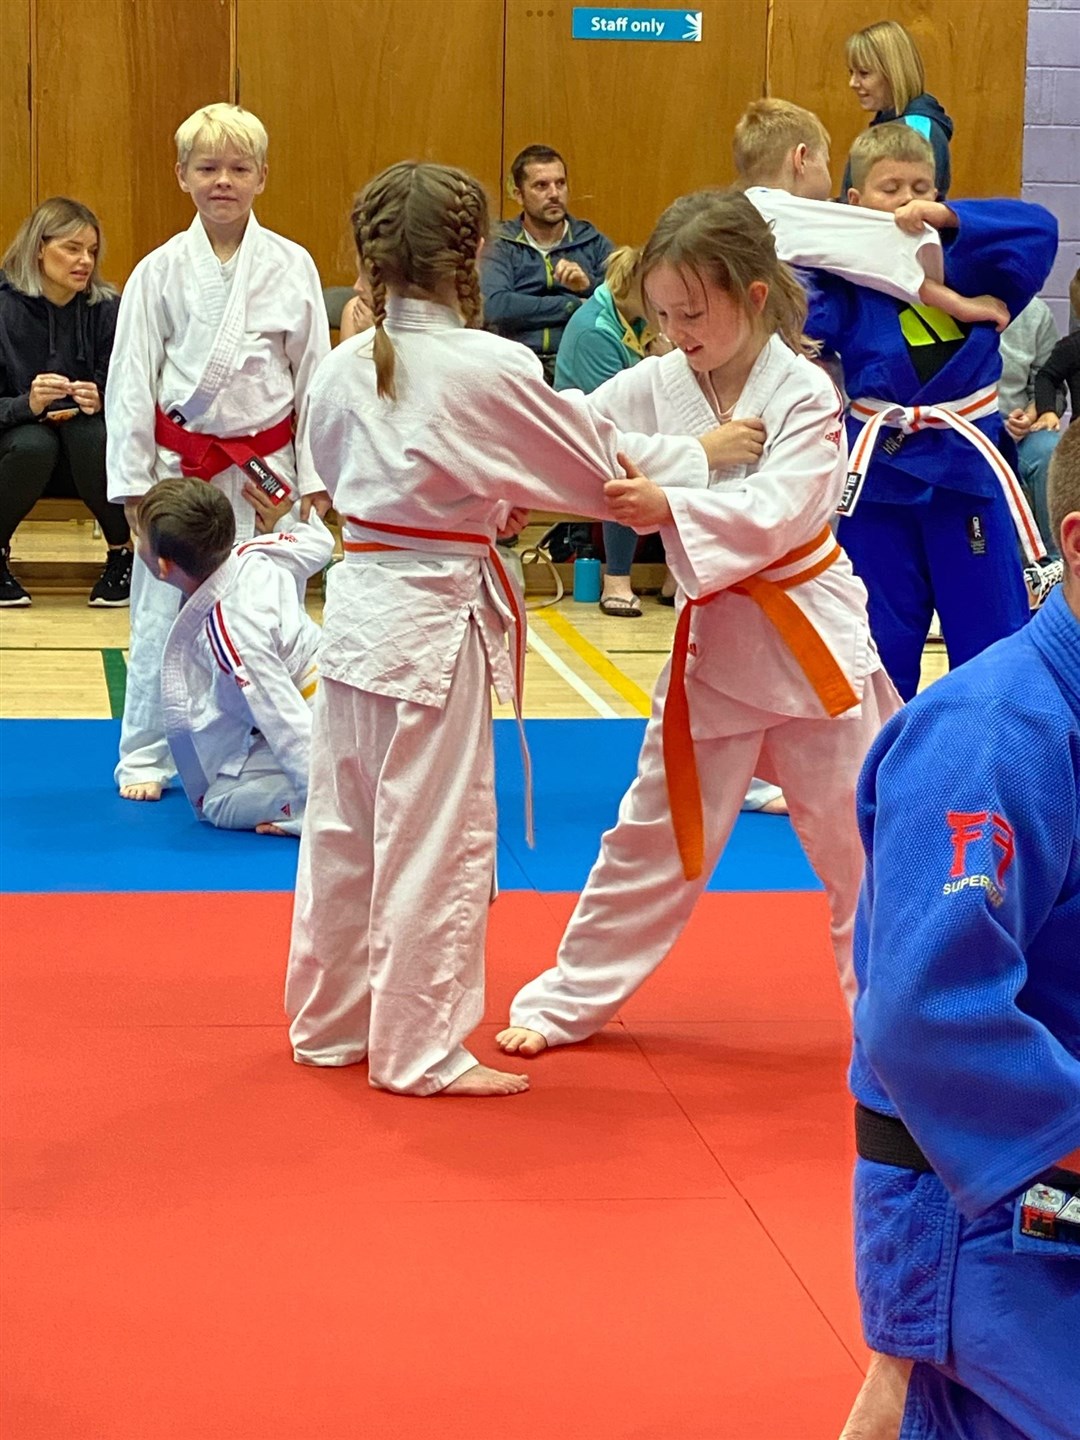 Judo players put through their paces.